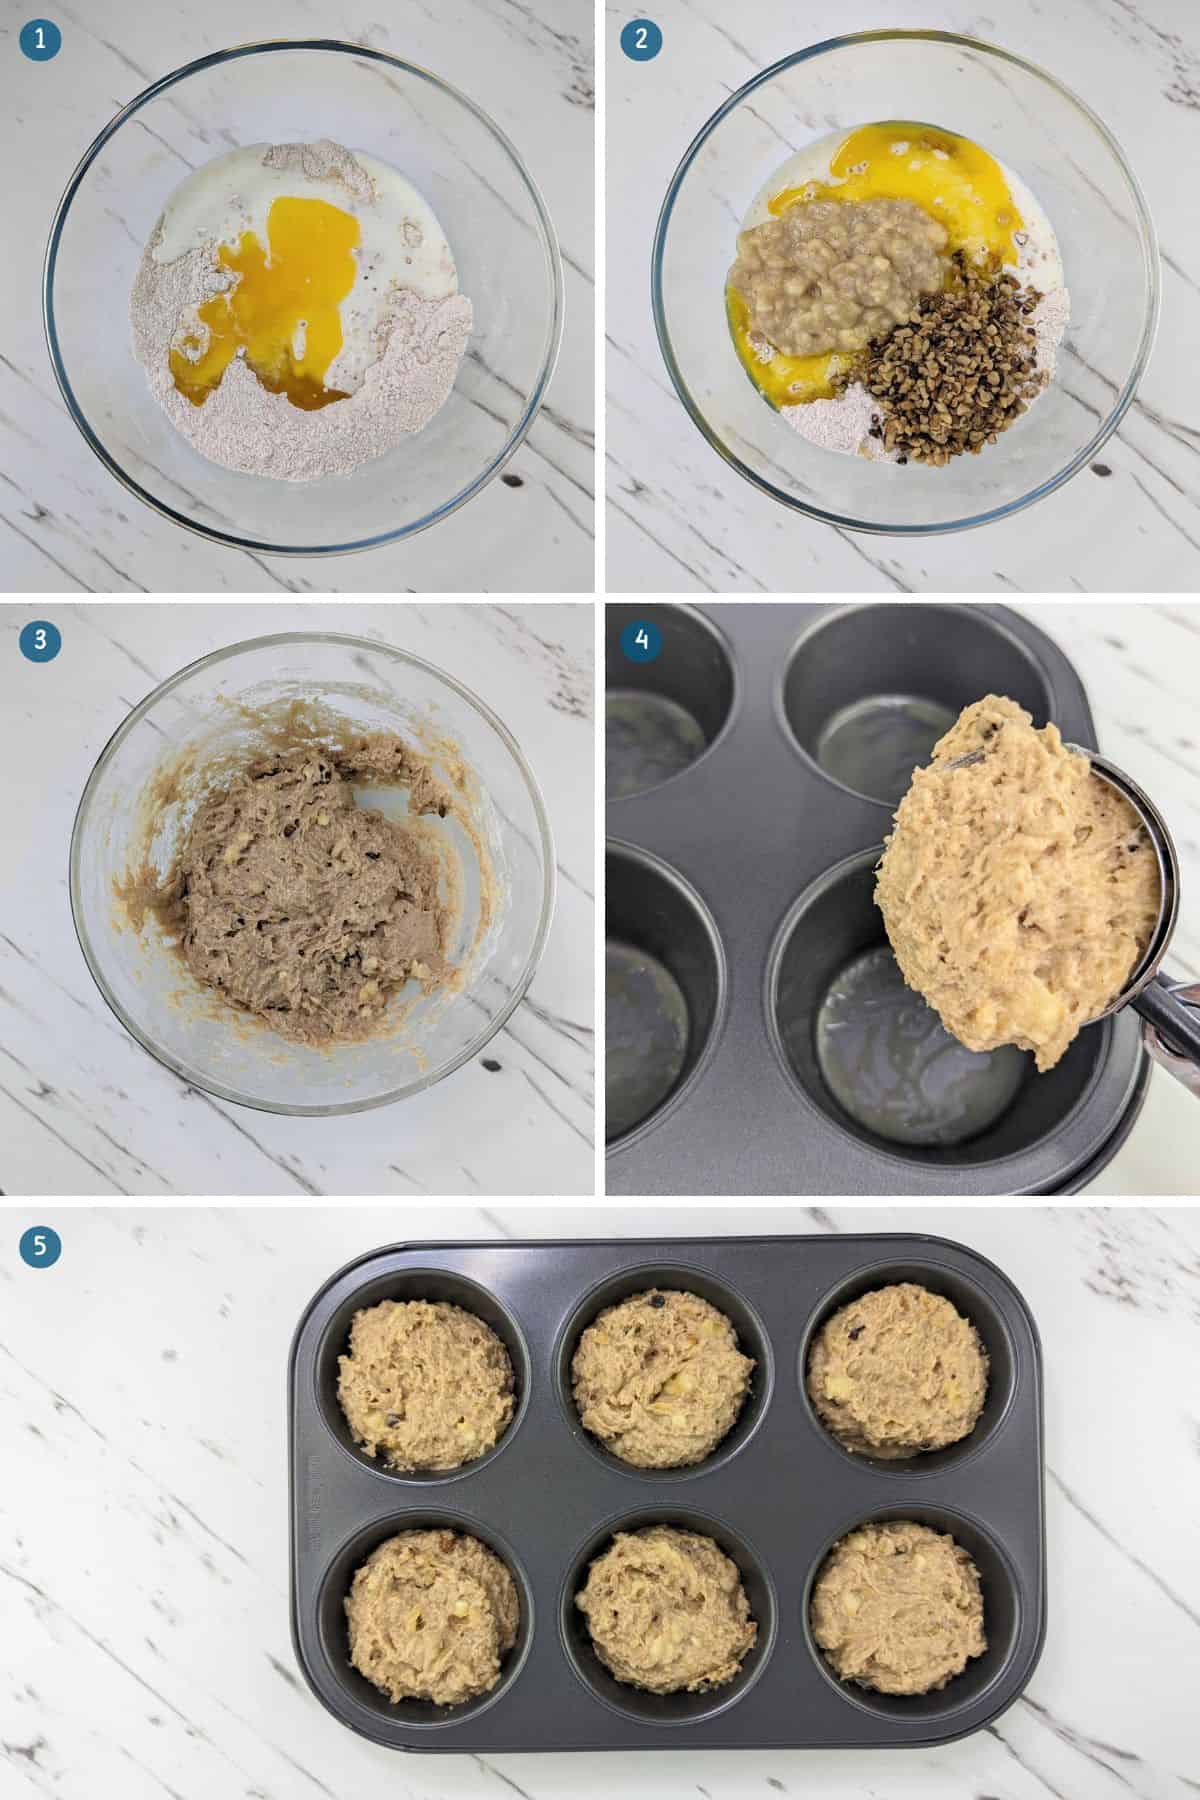 mixing-the-wet-and-dry-ingredients-and-spooing-the-mixture-into-the-muffin-pan-for-egg-free-banana-bread-and-walnut-muffins